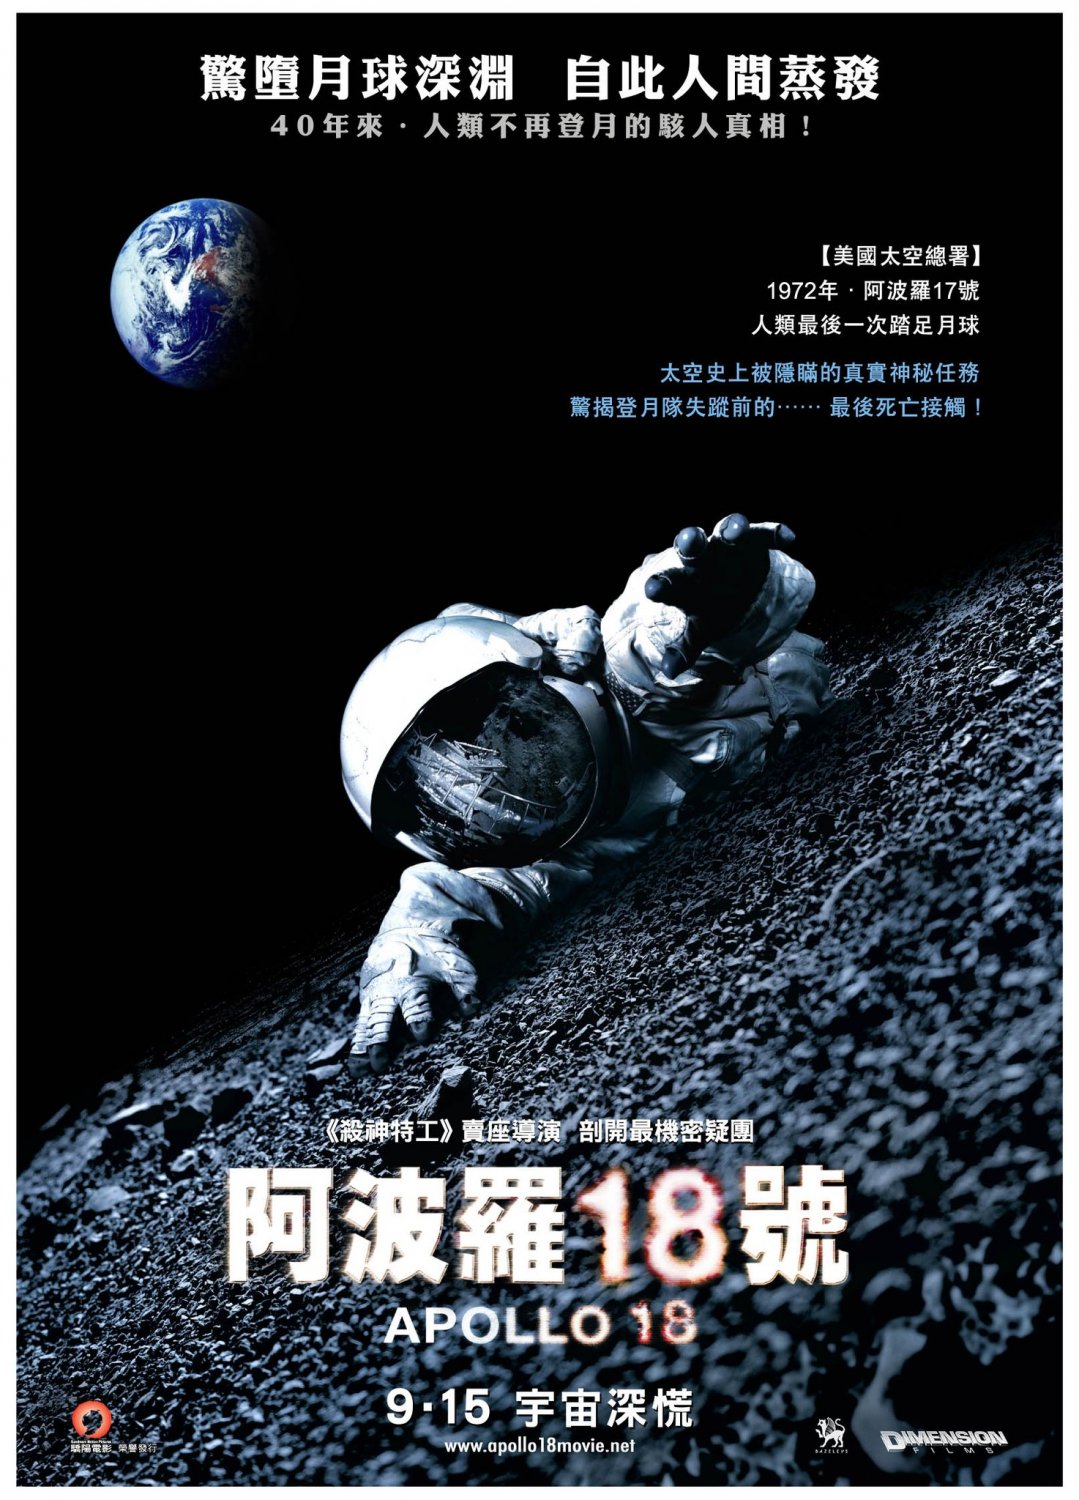 Extra Large Movie Poster Image for Apollo 18 (#4 of 5)